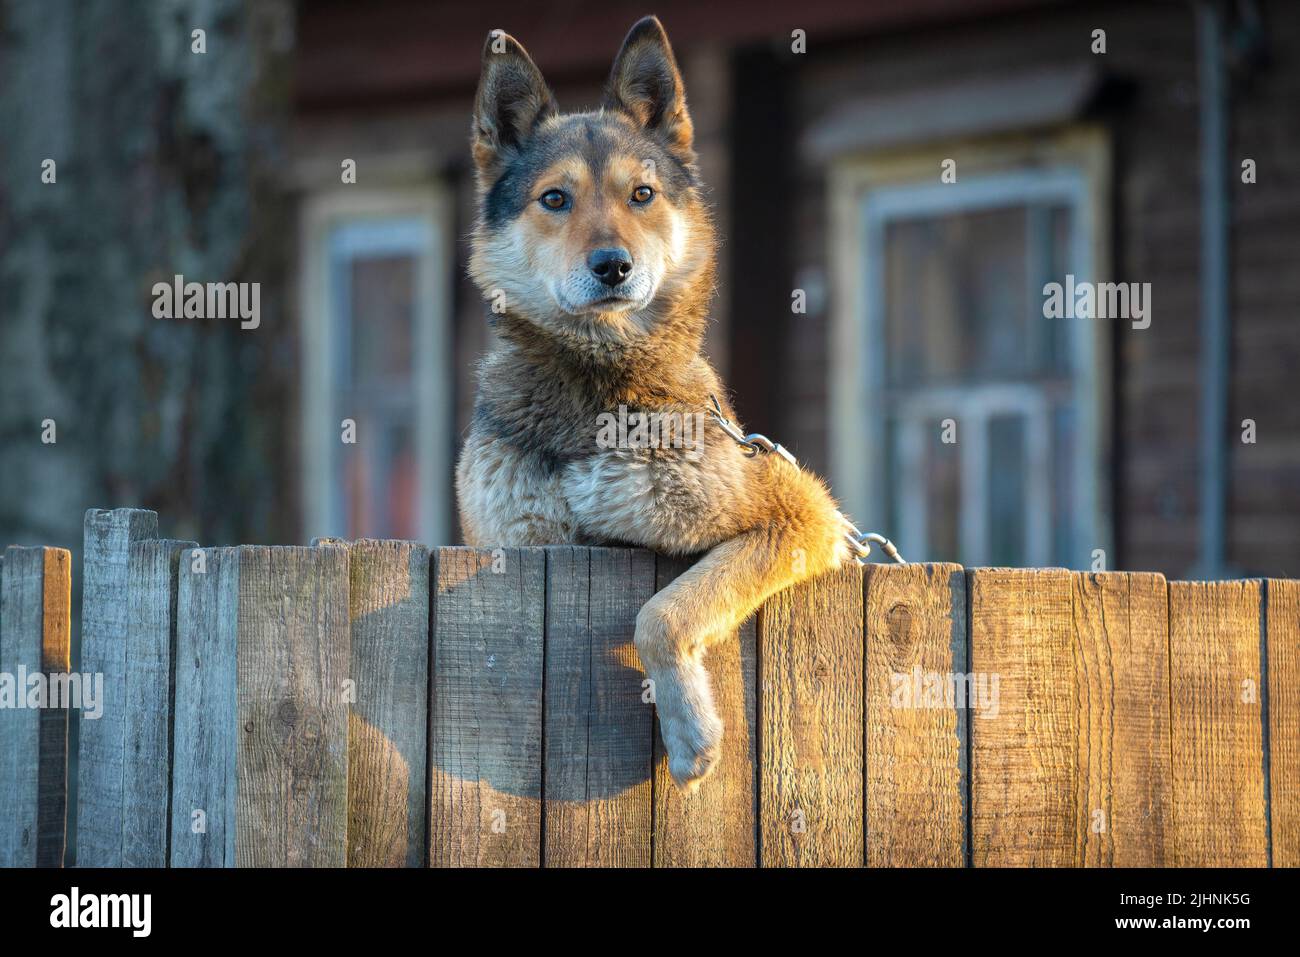 Portrait of a yard dog peeking out from behind a fence Stock Photo